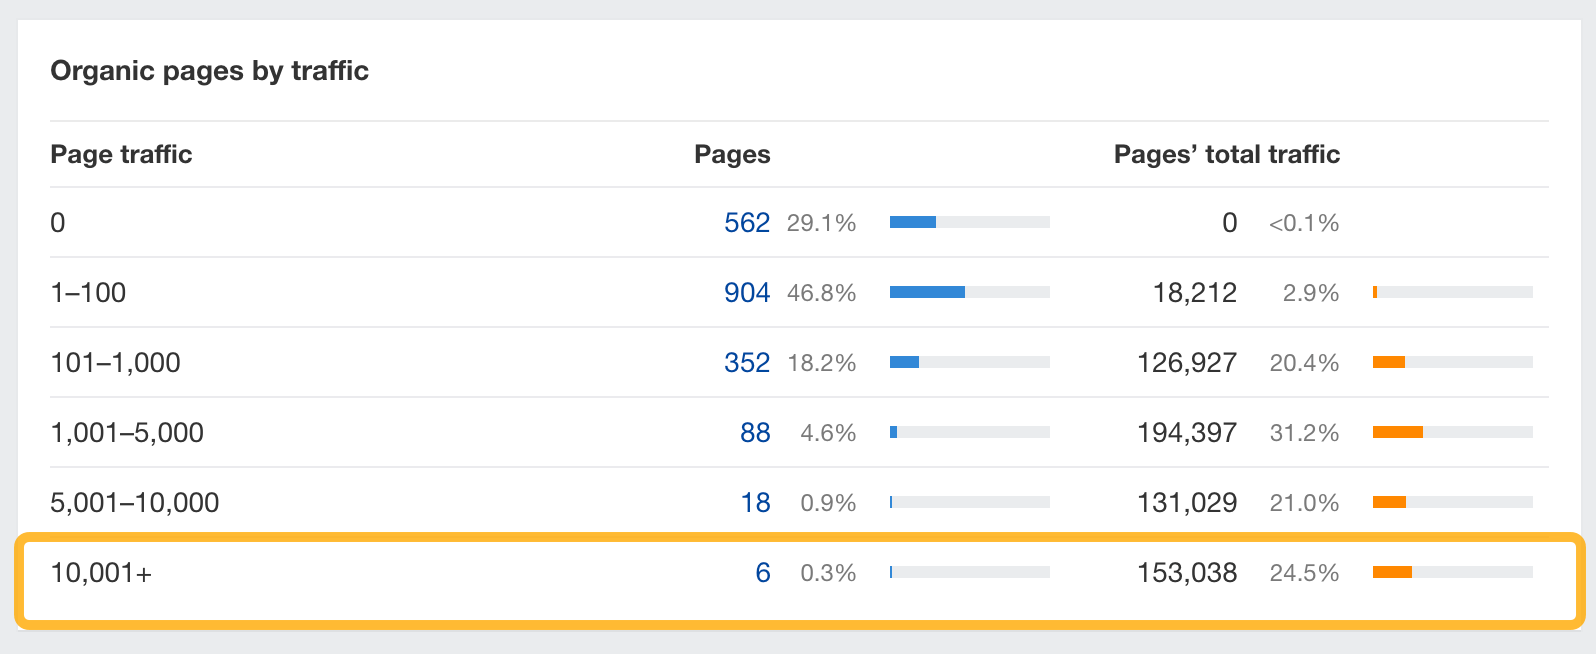 Ahrefs Overview 2.0（概览 2.0）中边栏的 Organic pages by traffic（按流量划分的自然网页） 数据